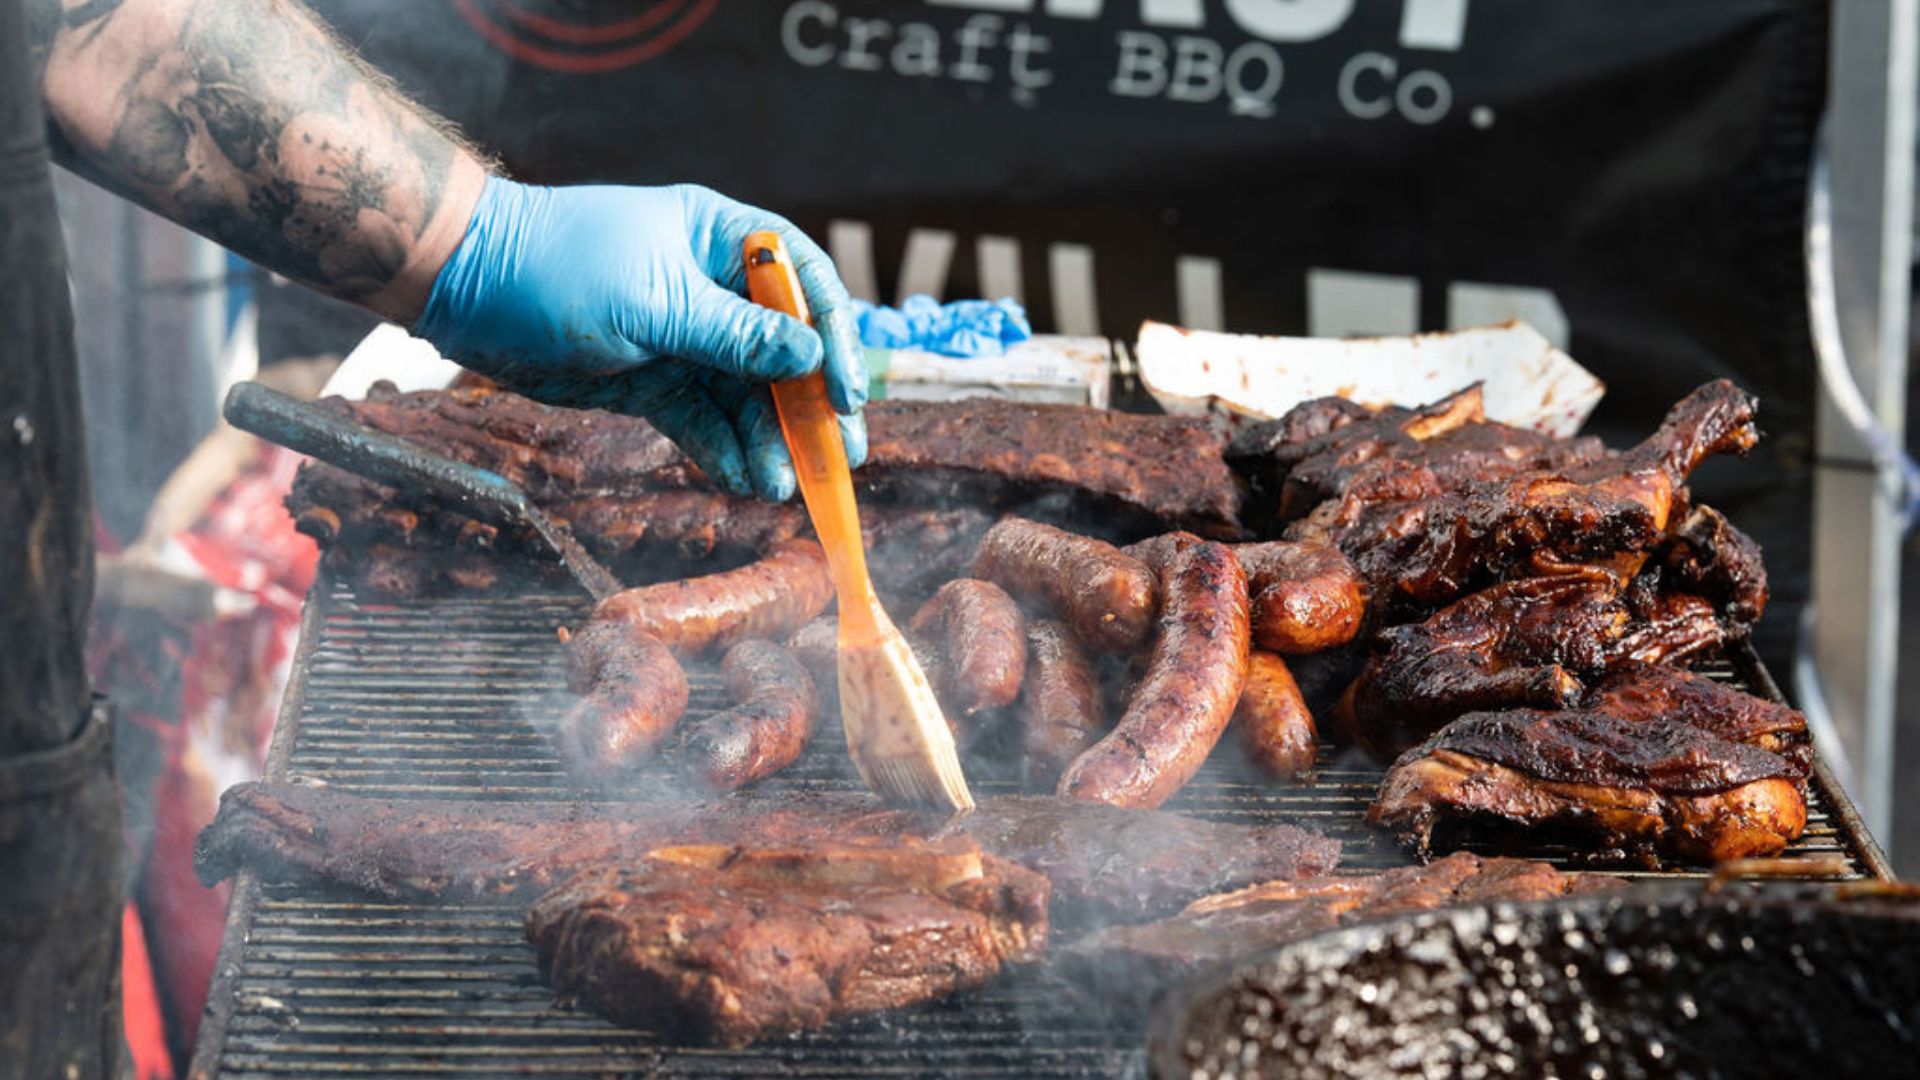 The Pig & Whiskey Festival features St. Louis barbecue.